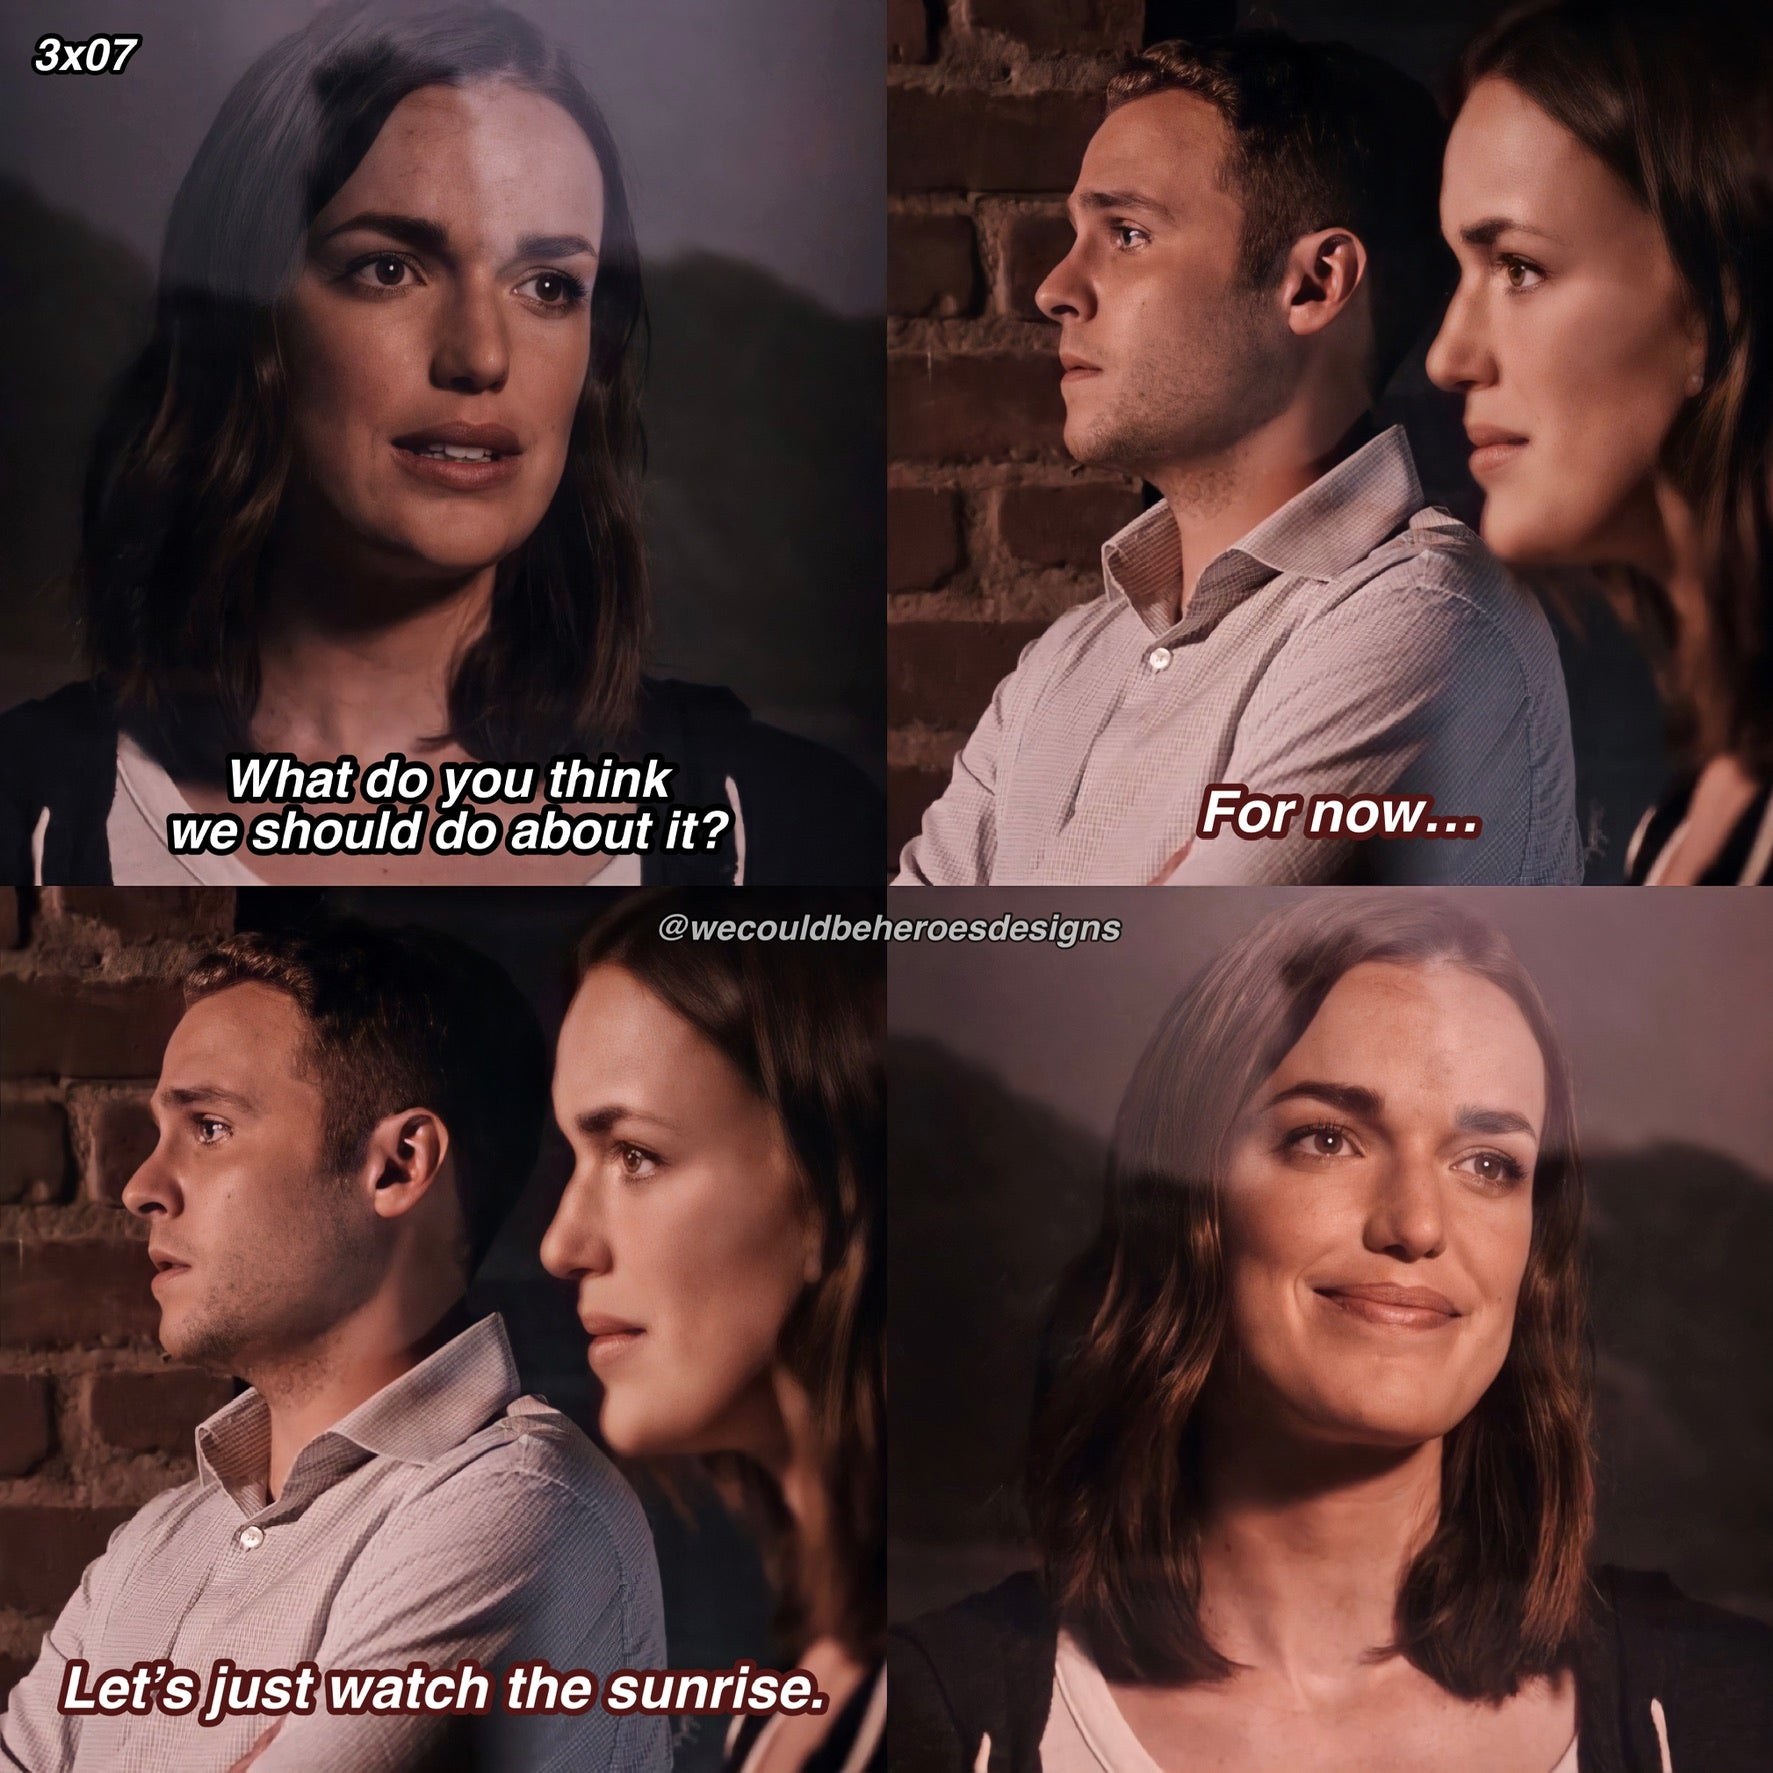 Marvel’s Agents of S.H.I.E.L.D. FitzSimmons Let’s Just Watch The Sunrise Scene